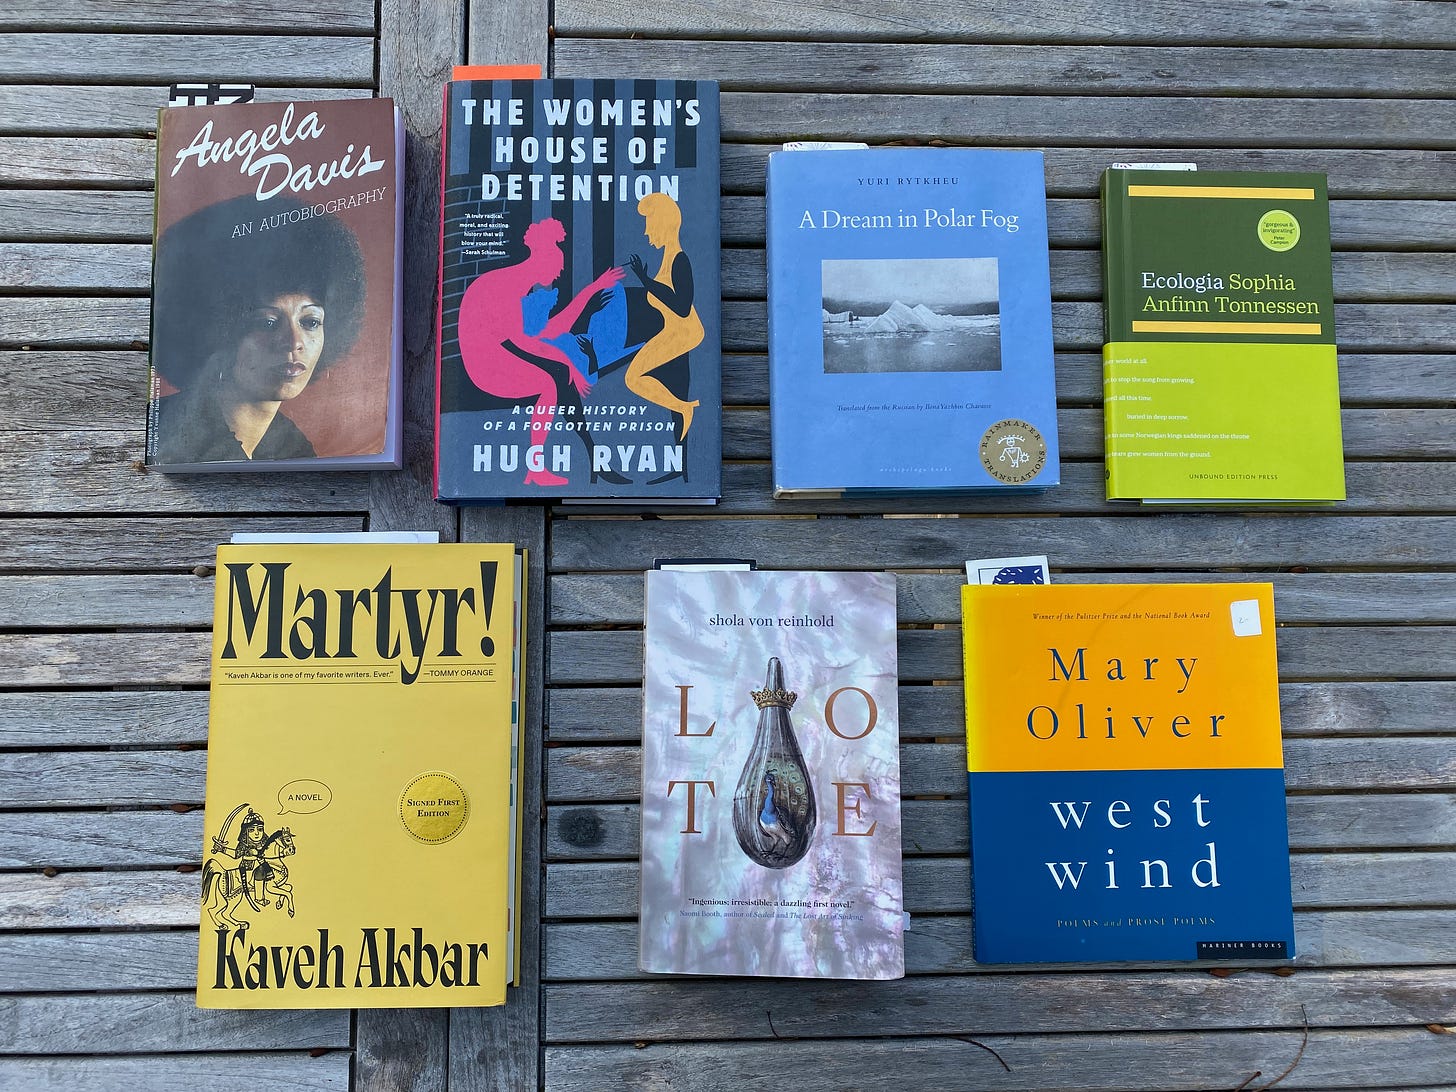 The seven listed books laid out in two rows on a wooden porch table.